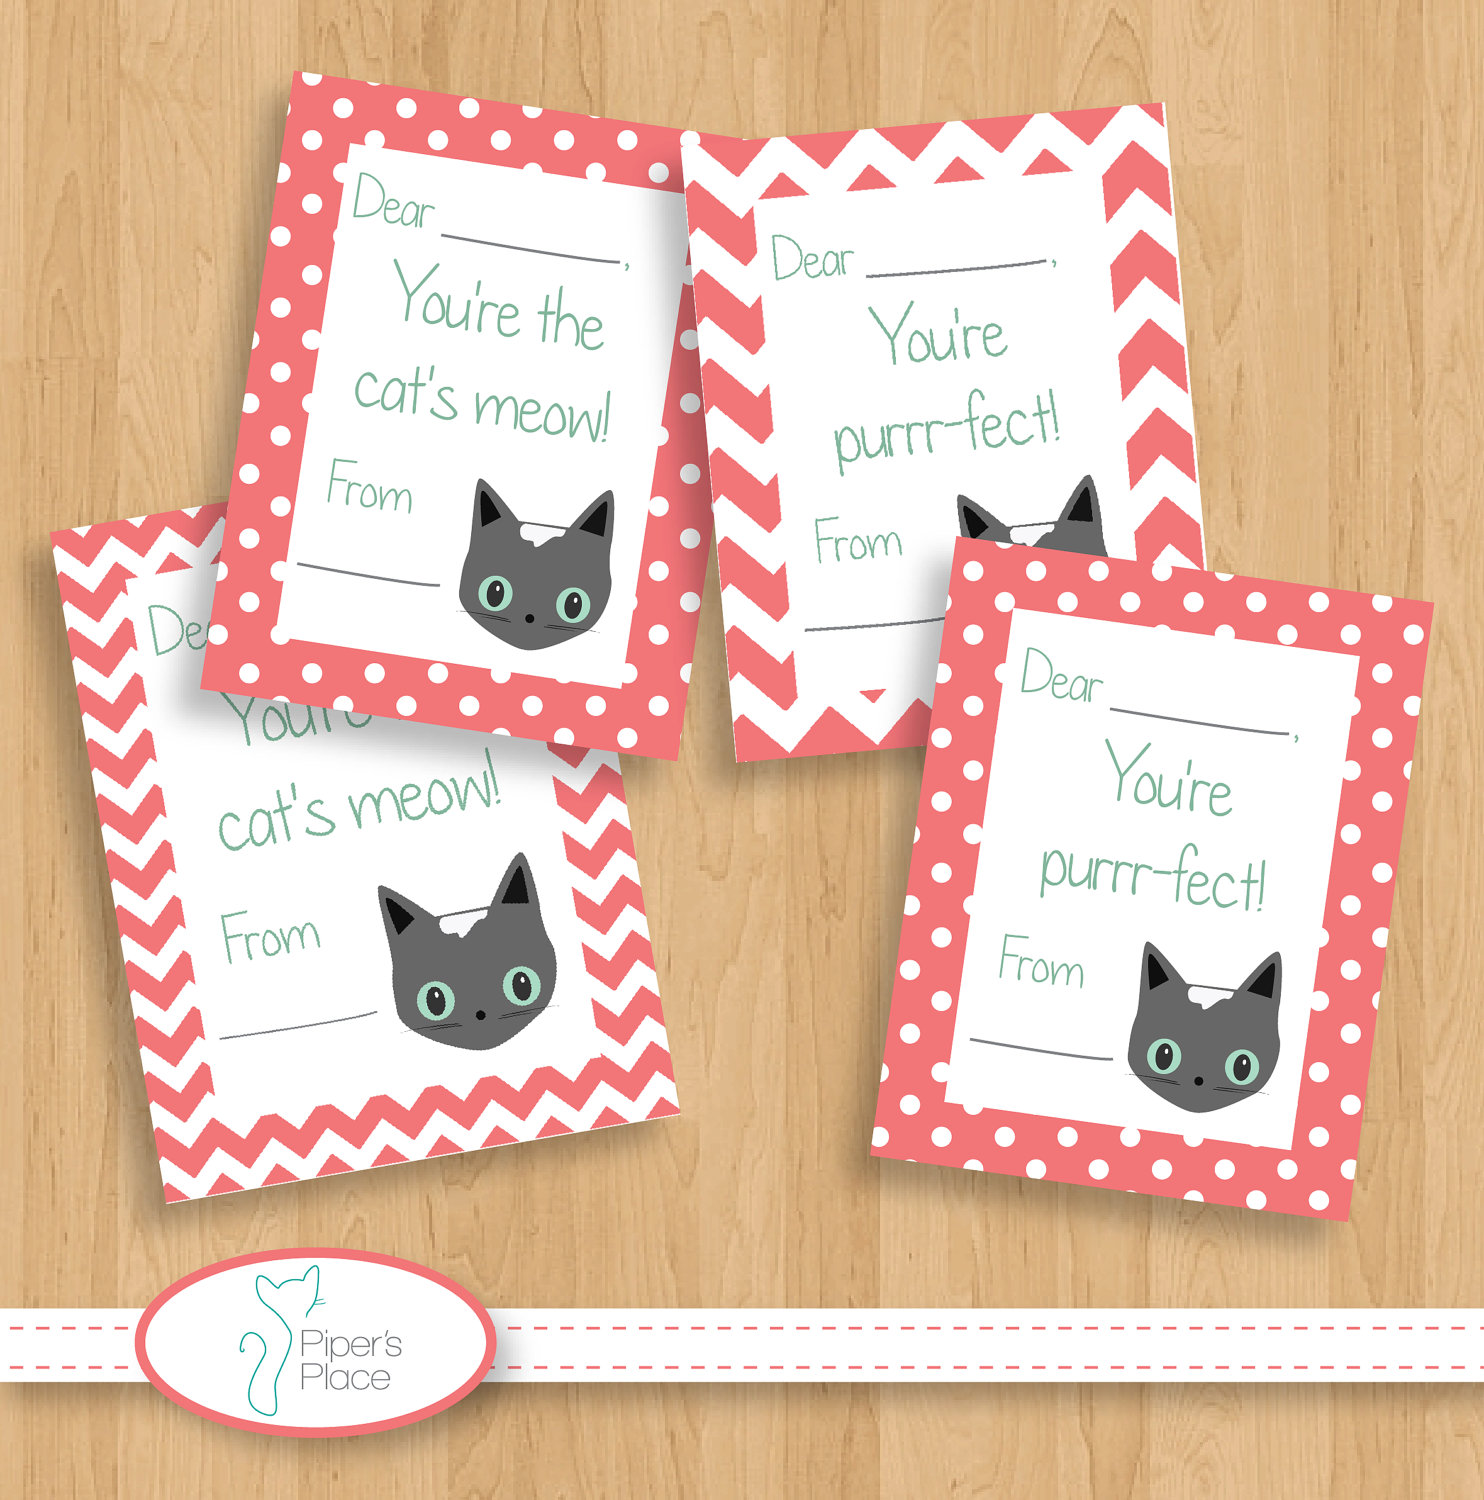 5-best-images-of-free-printable-valentine-cards-cat-valentine-s-day